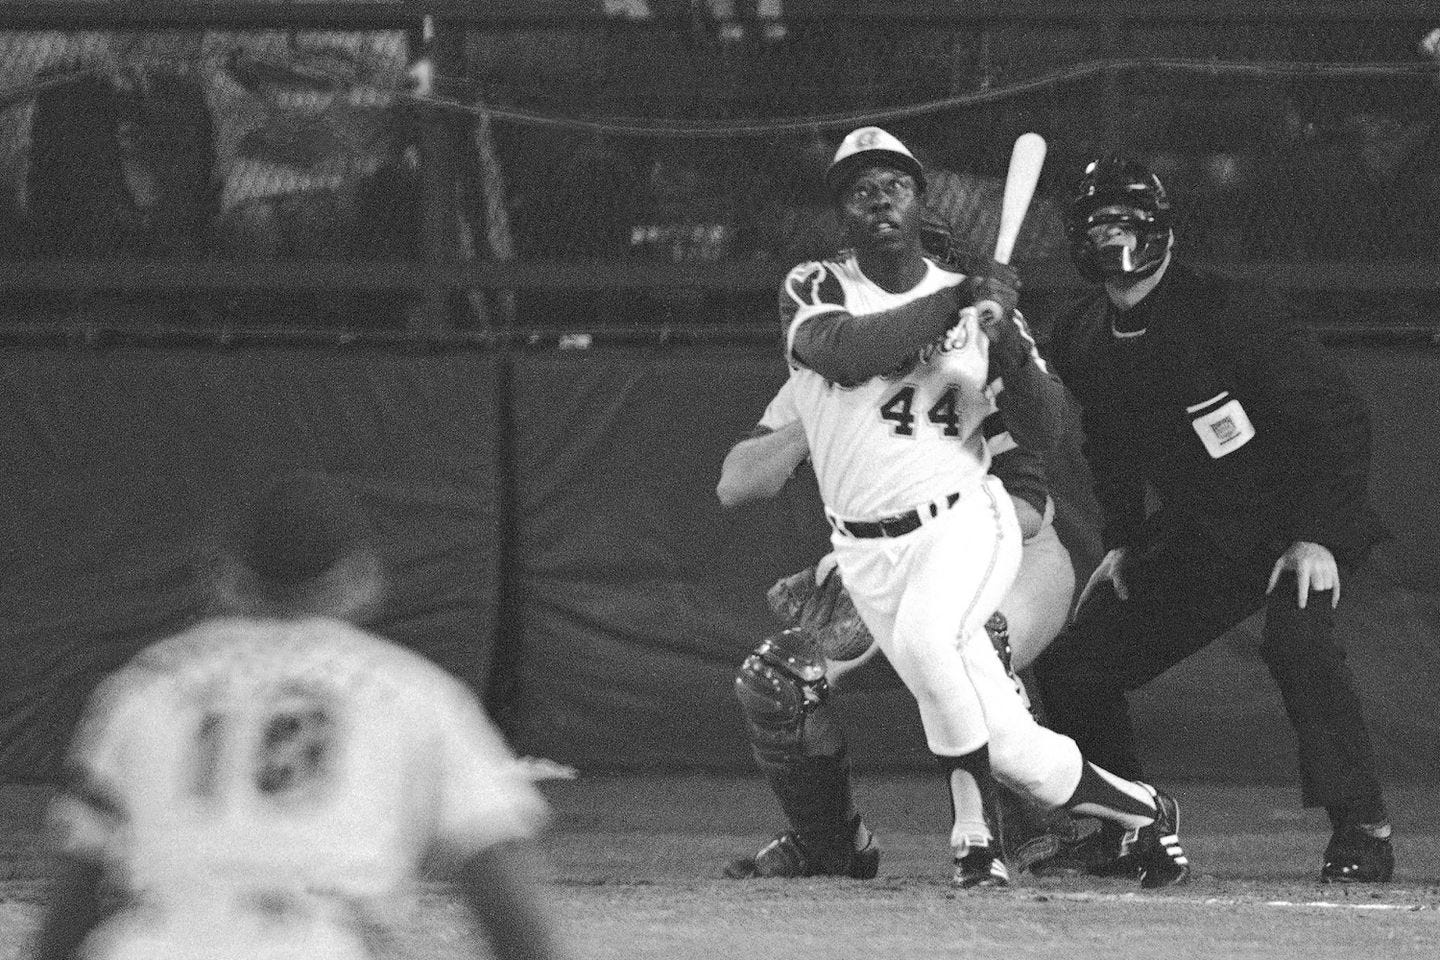 Mr. Aaron eyed the flight of the ball as he hit his 715th career homer in a game against the Los Angeles Dodgers in Atlanta in 1974.